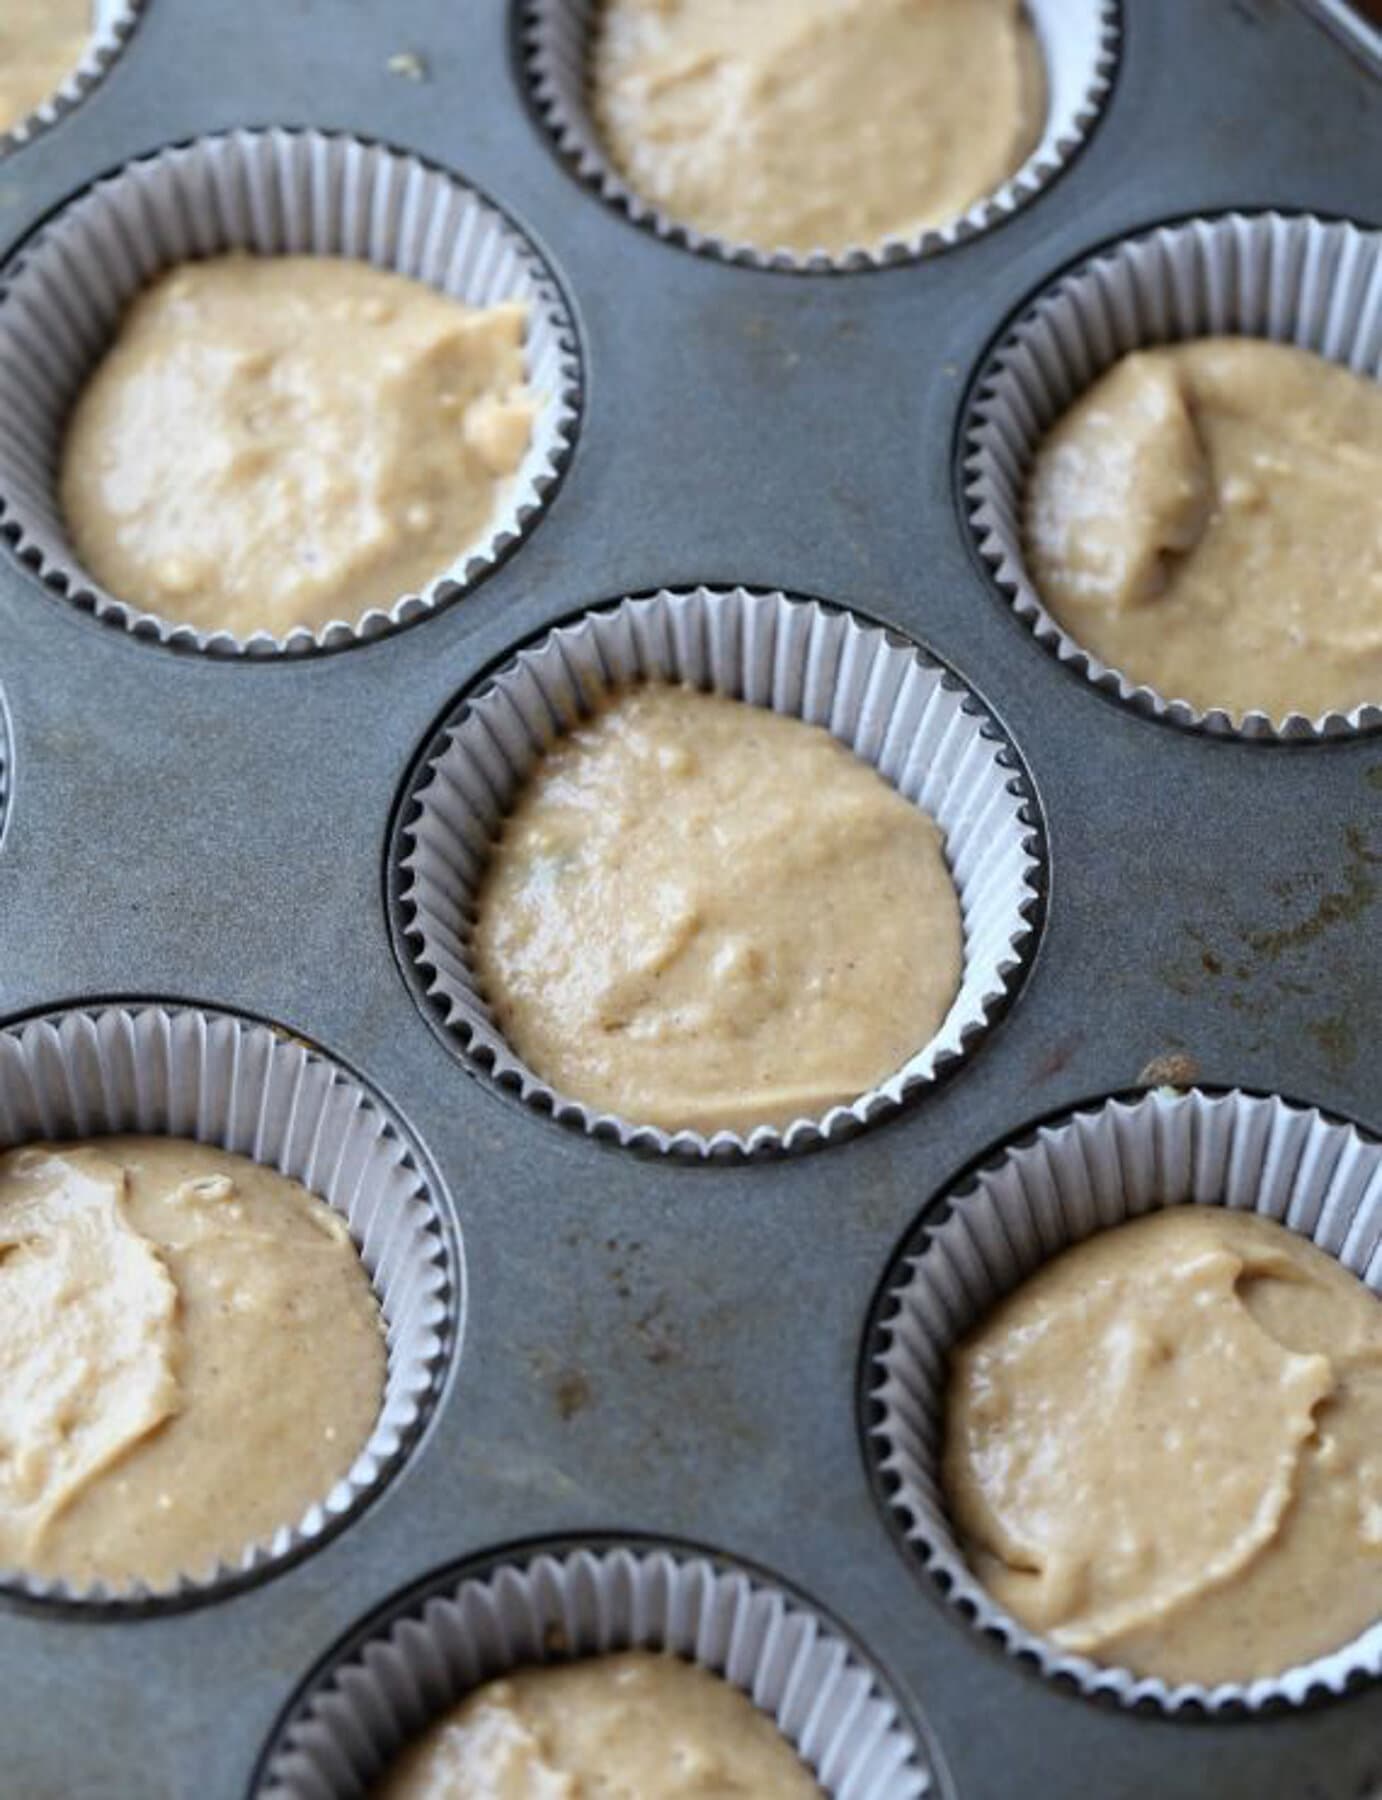 Cinnamon muffin batter filling 2/3s of a muffin tin